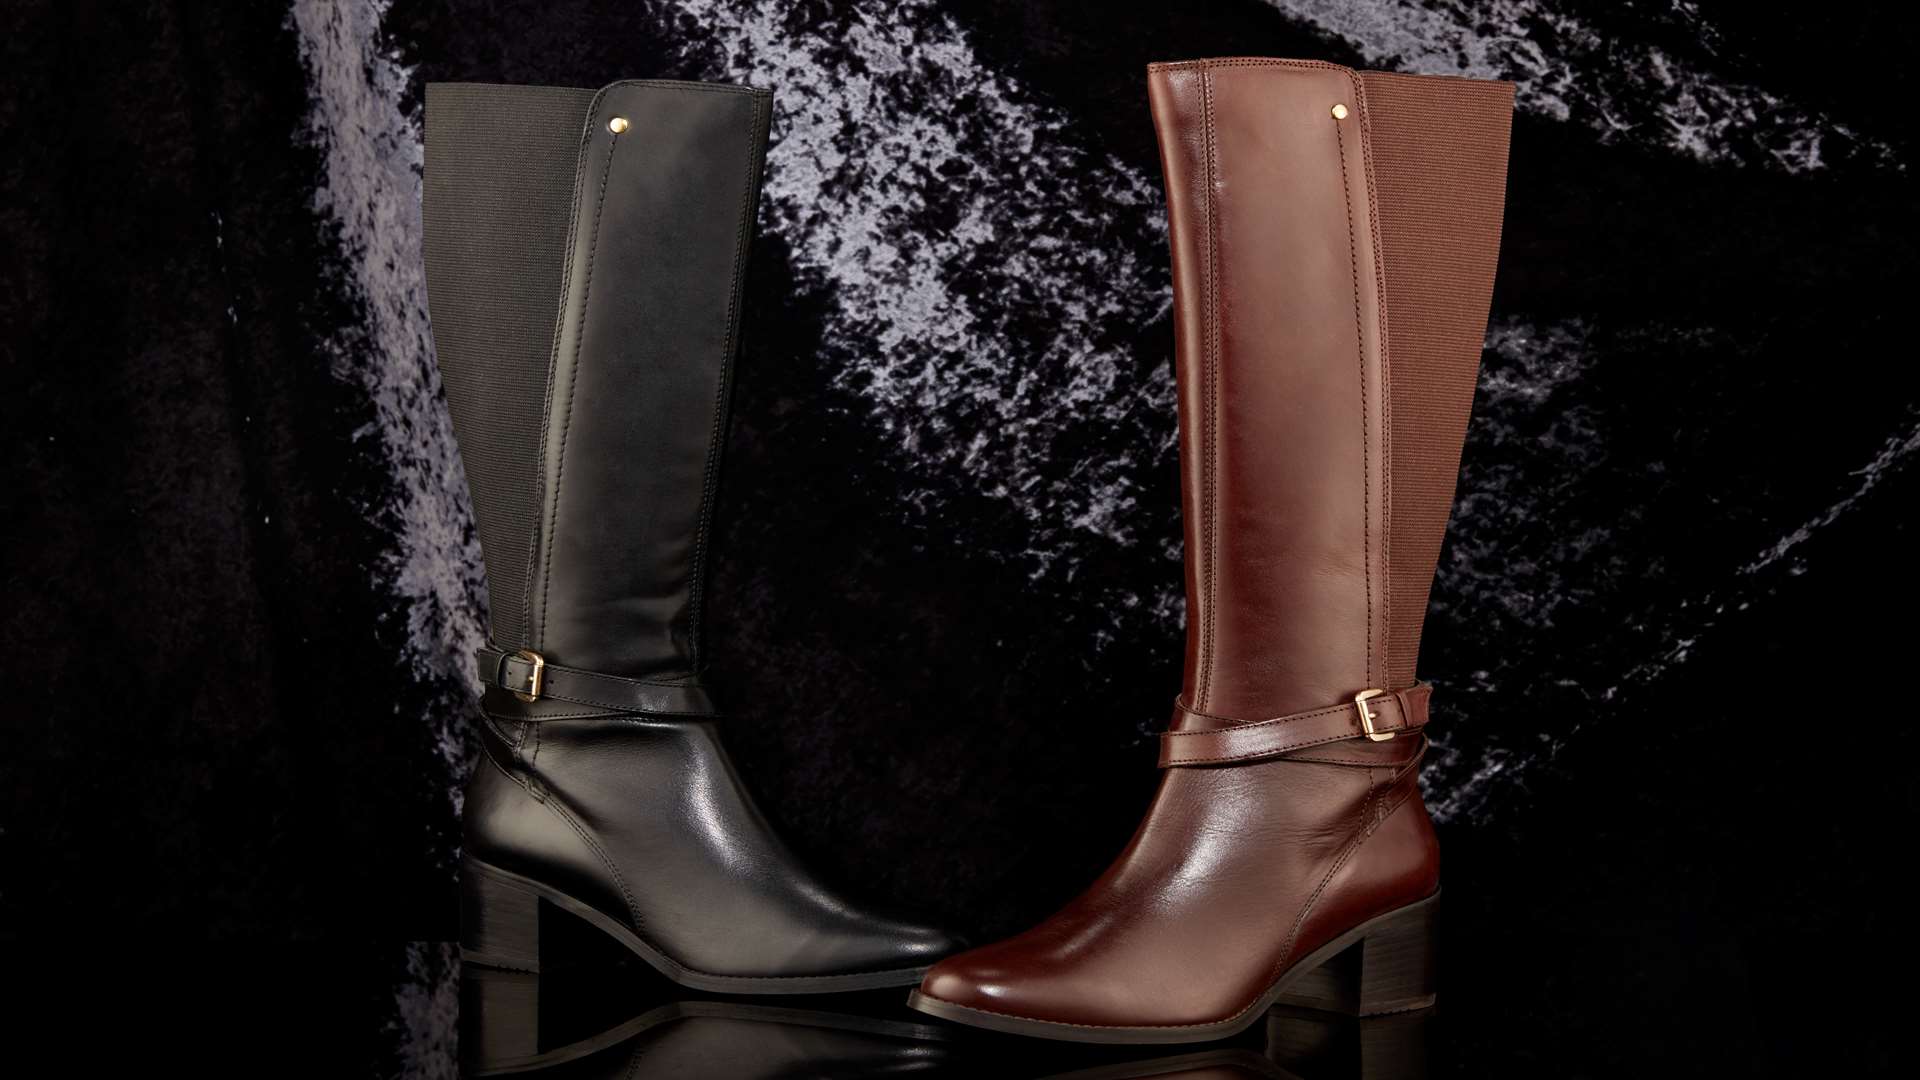 Vivv boots by Dune in brown and black, £130